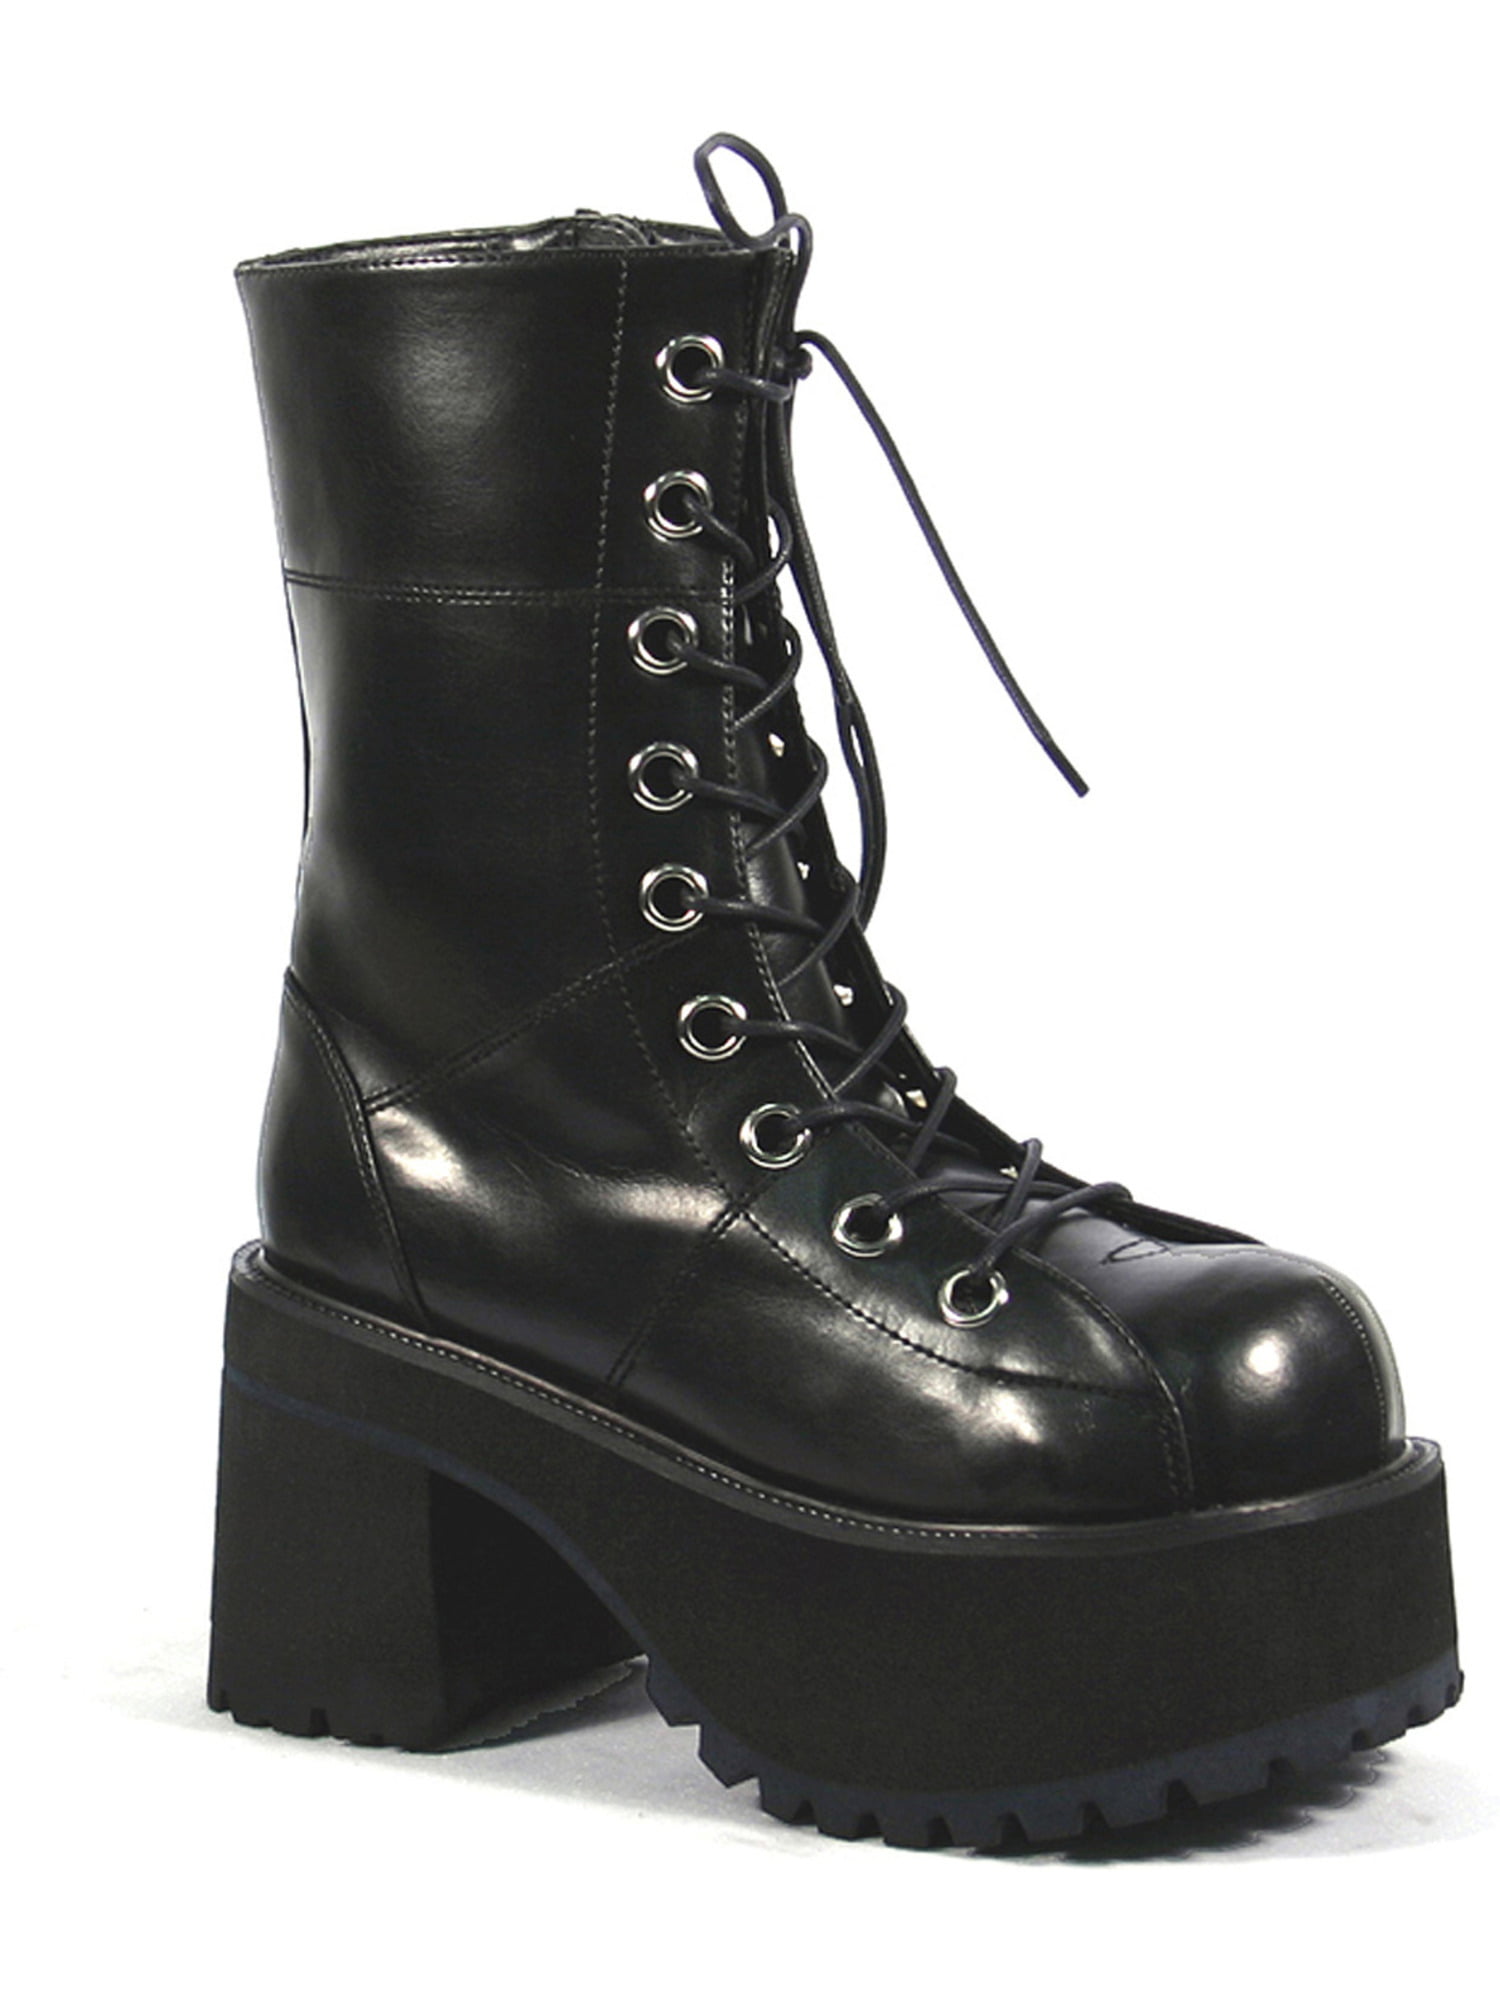 3 inch black ankle boots